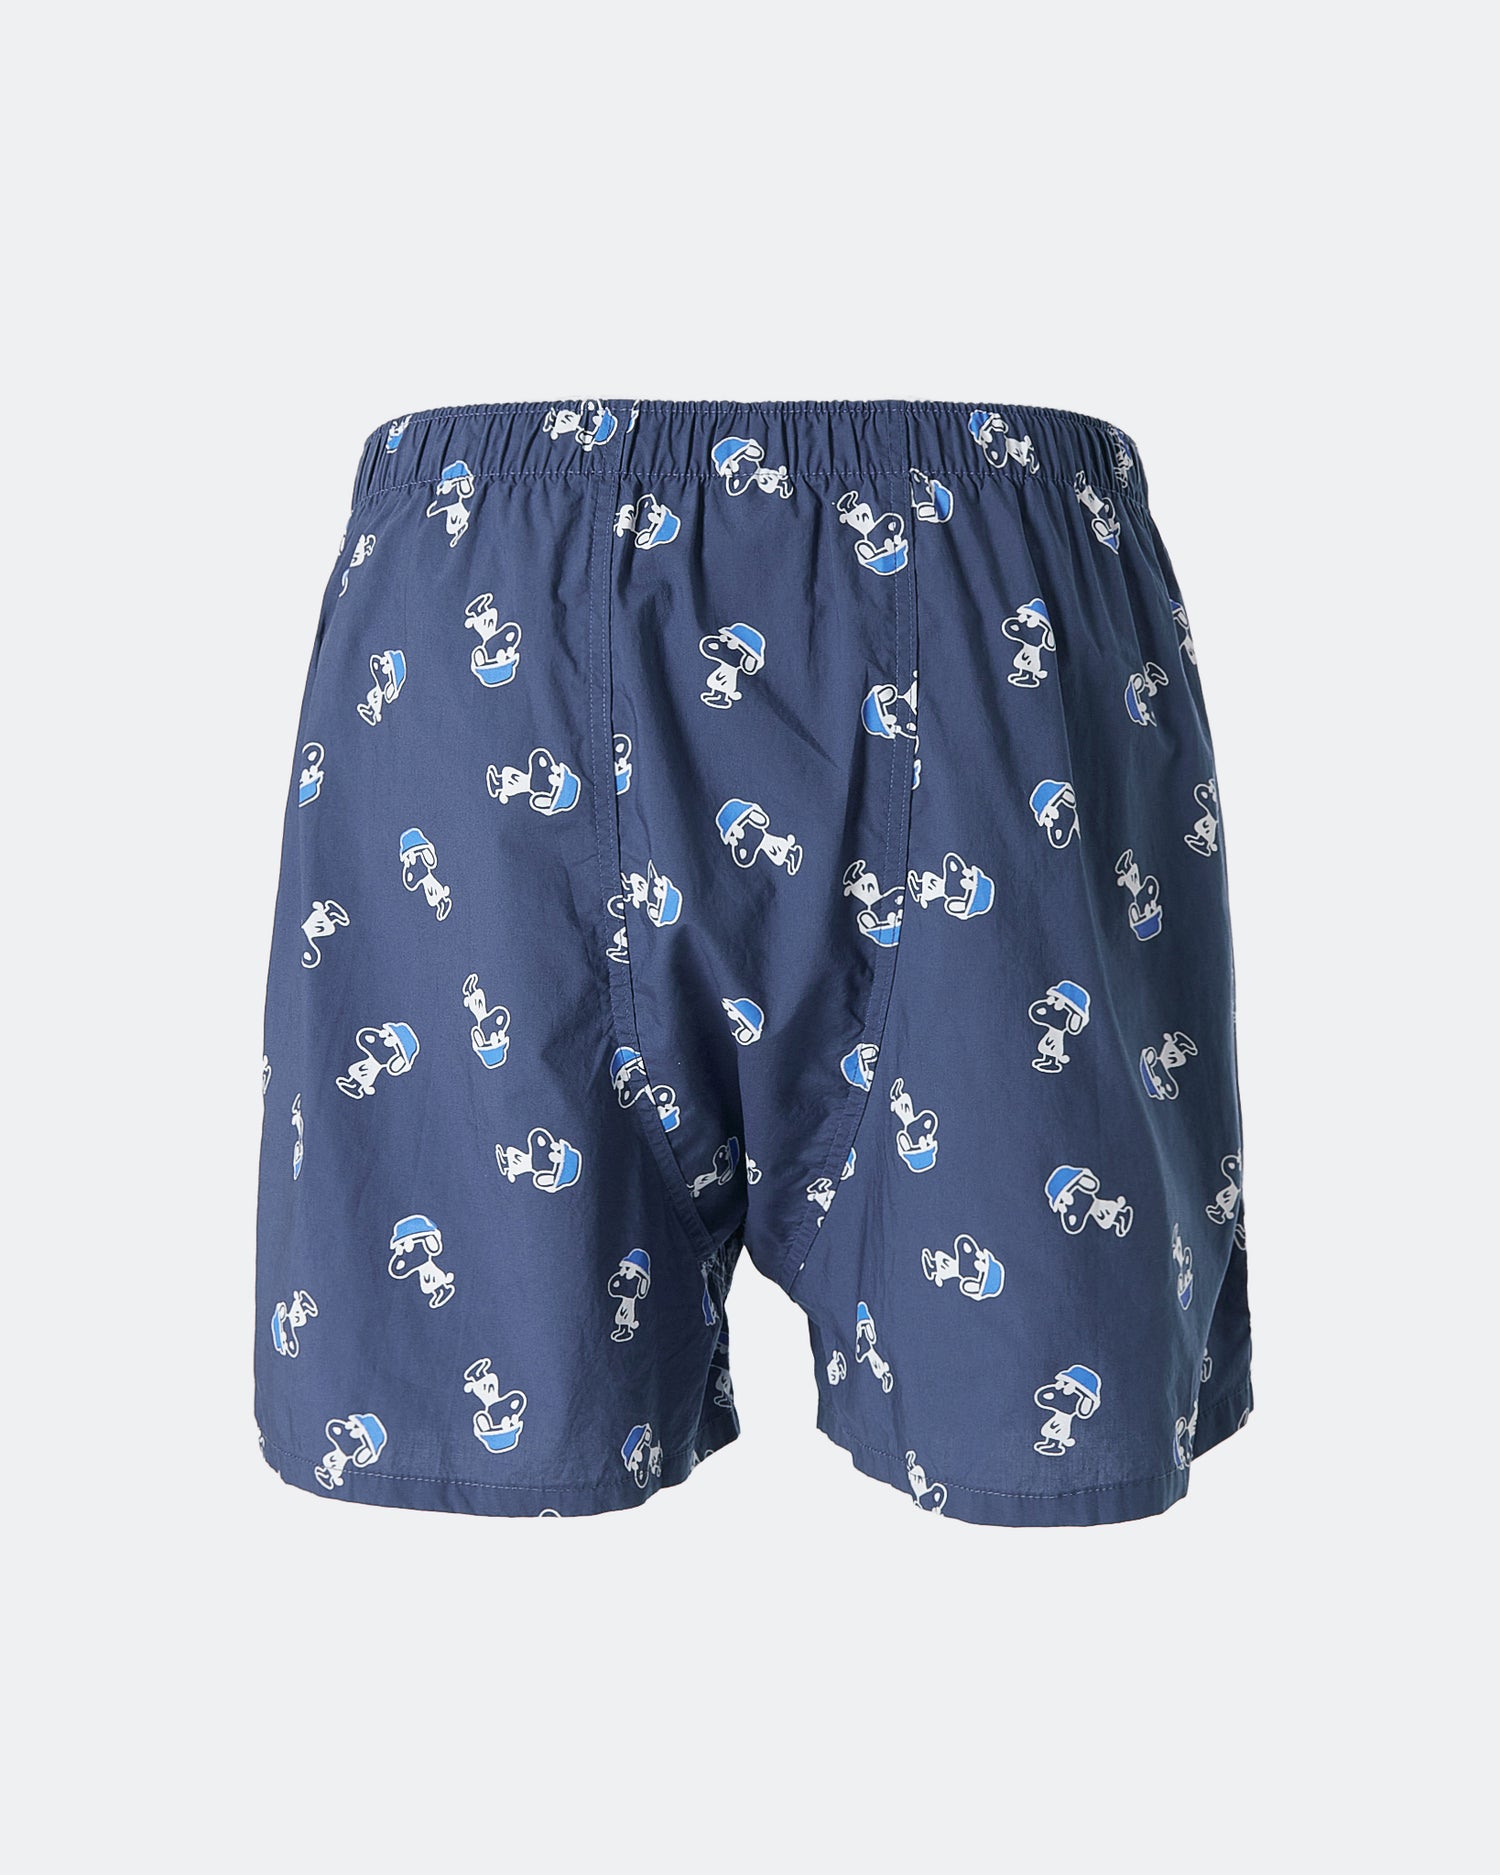 TH Snoopy Over Printed Men Boxer 6.90